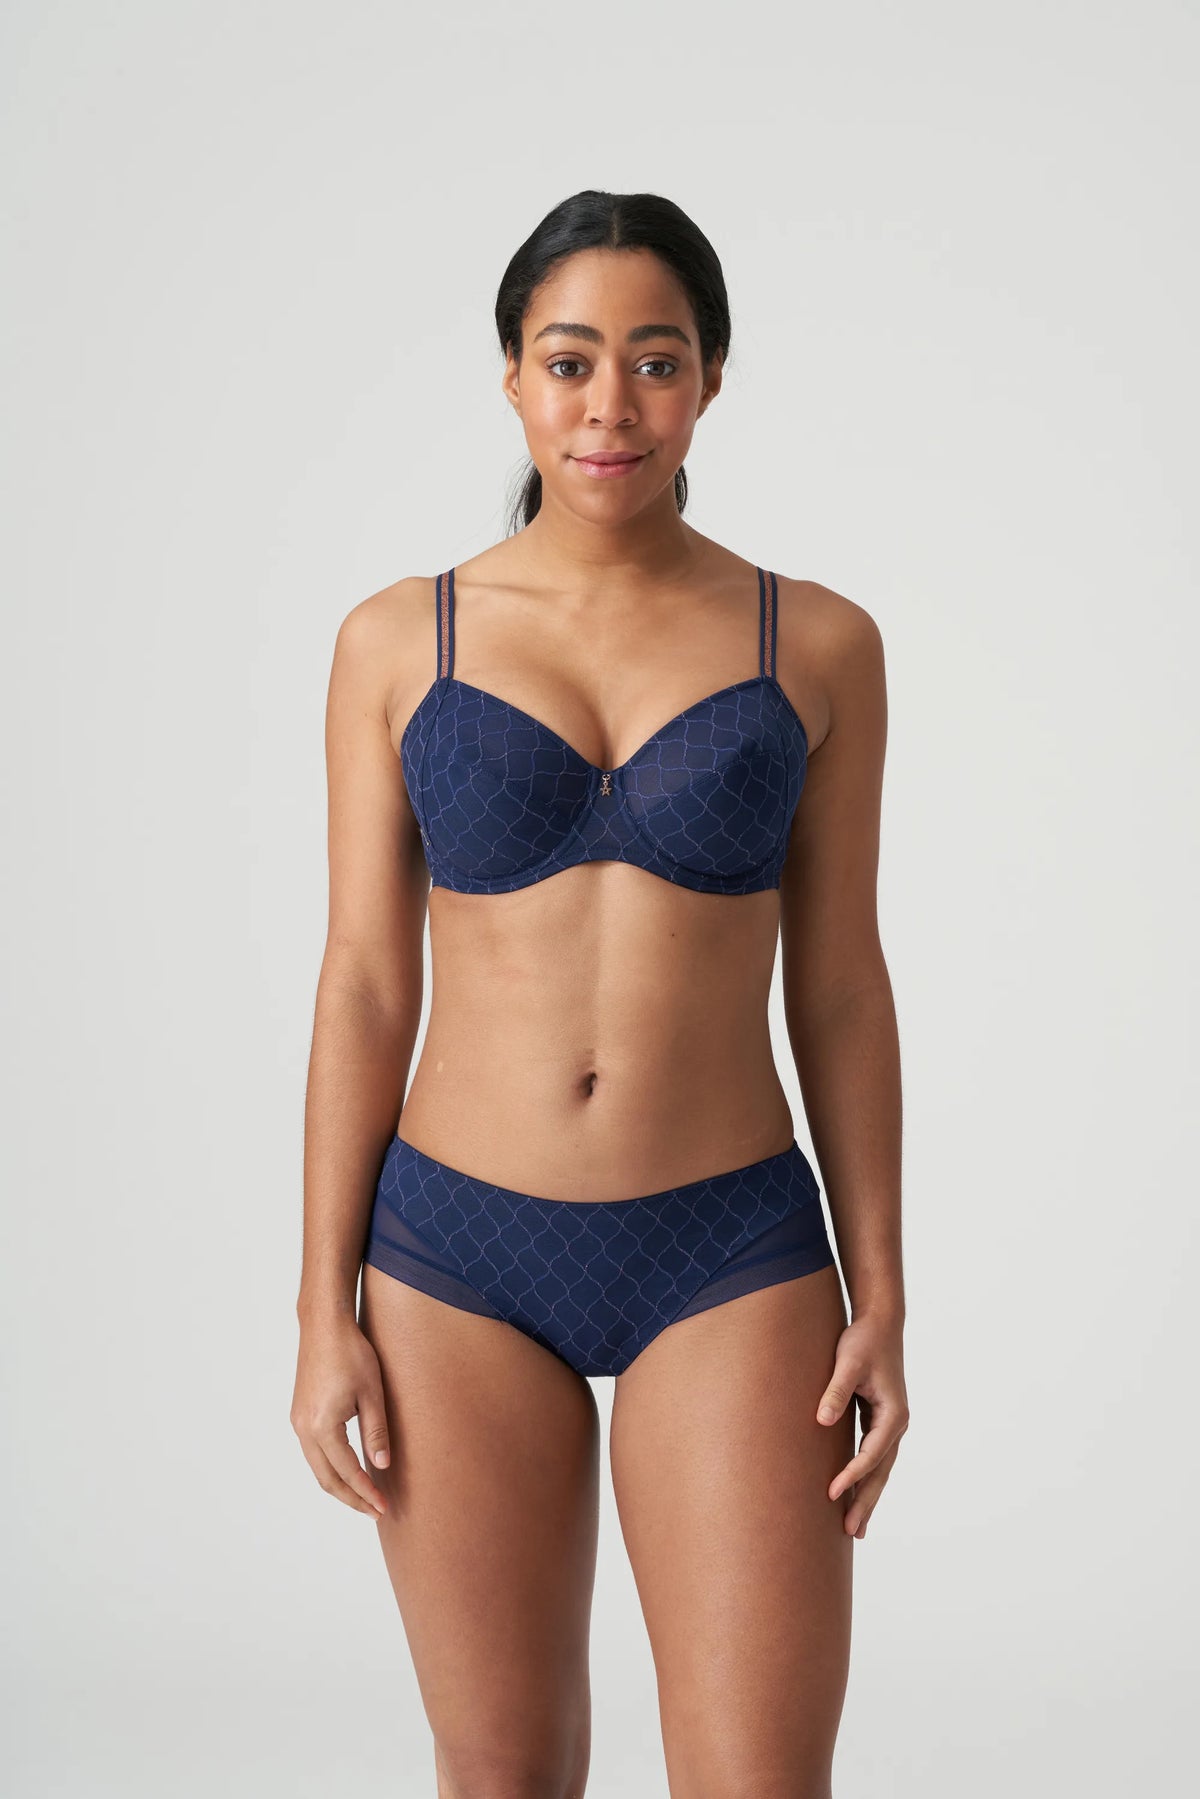 PRIMA DONNA TWIST CHRYSO FULL CUP - SAPPHIRE BLUE – Tops & Bottoms